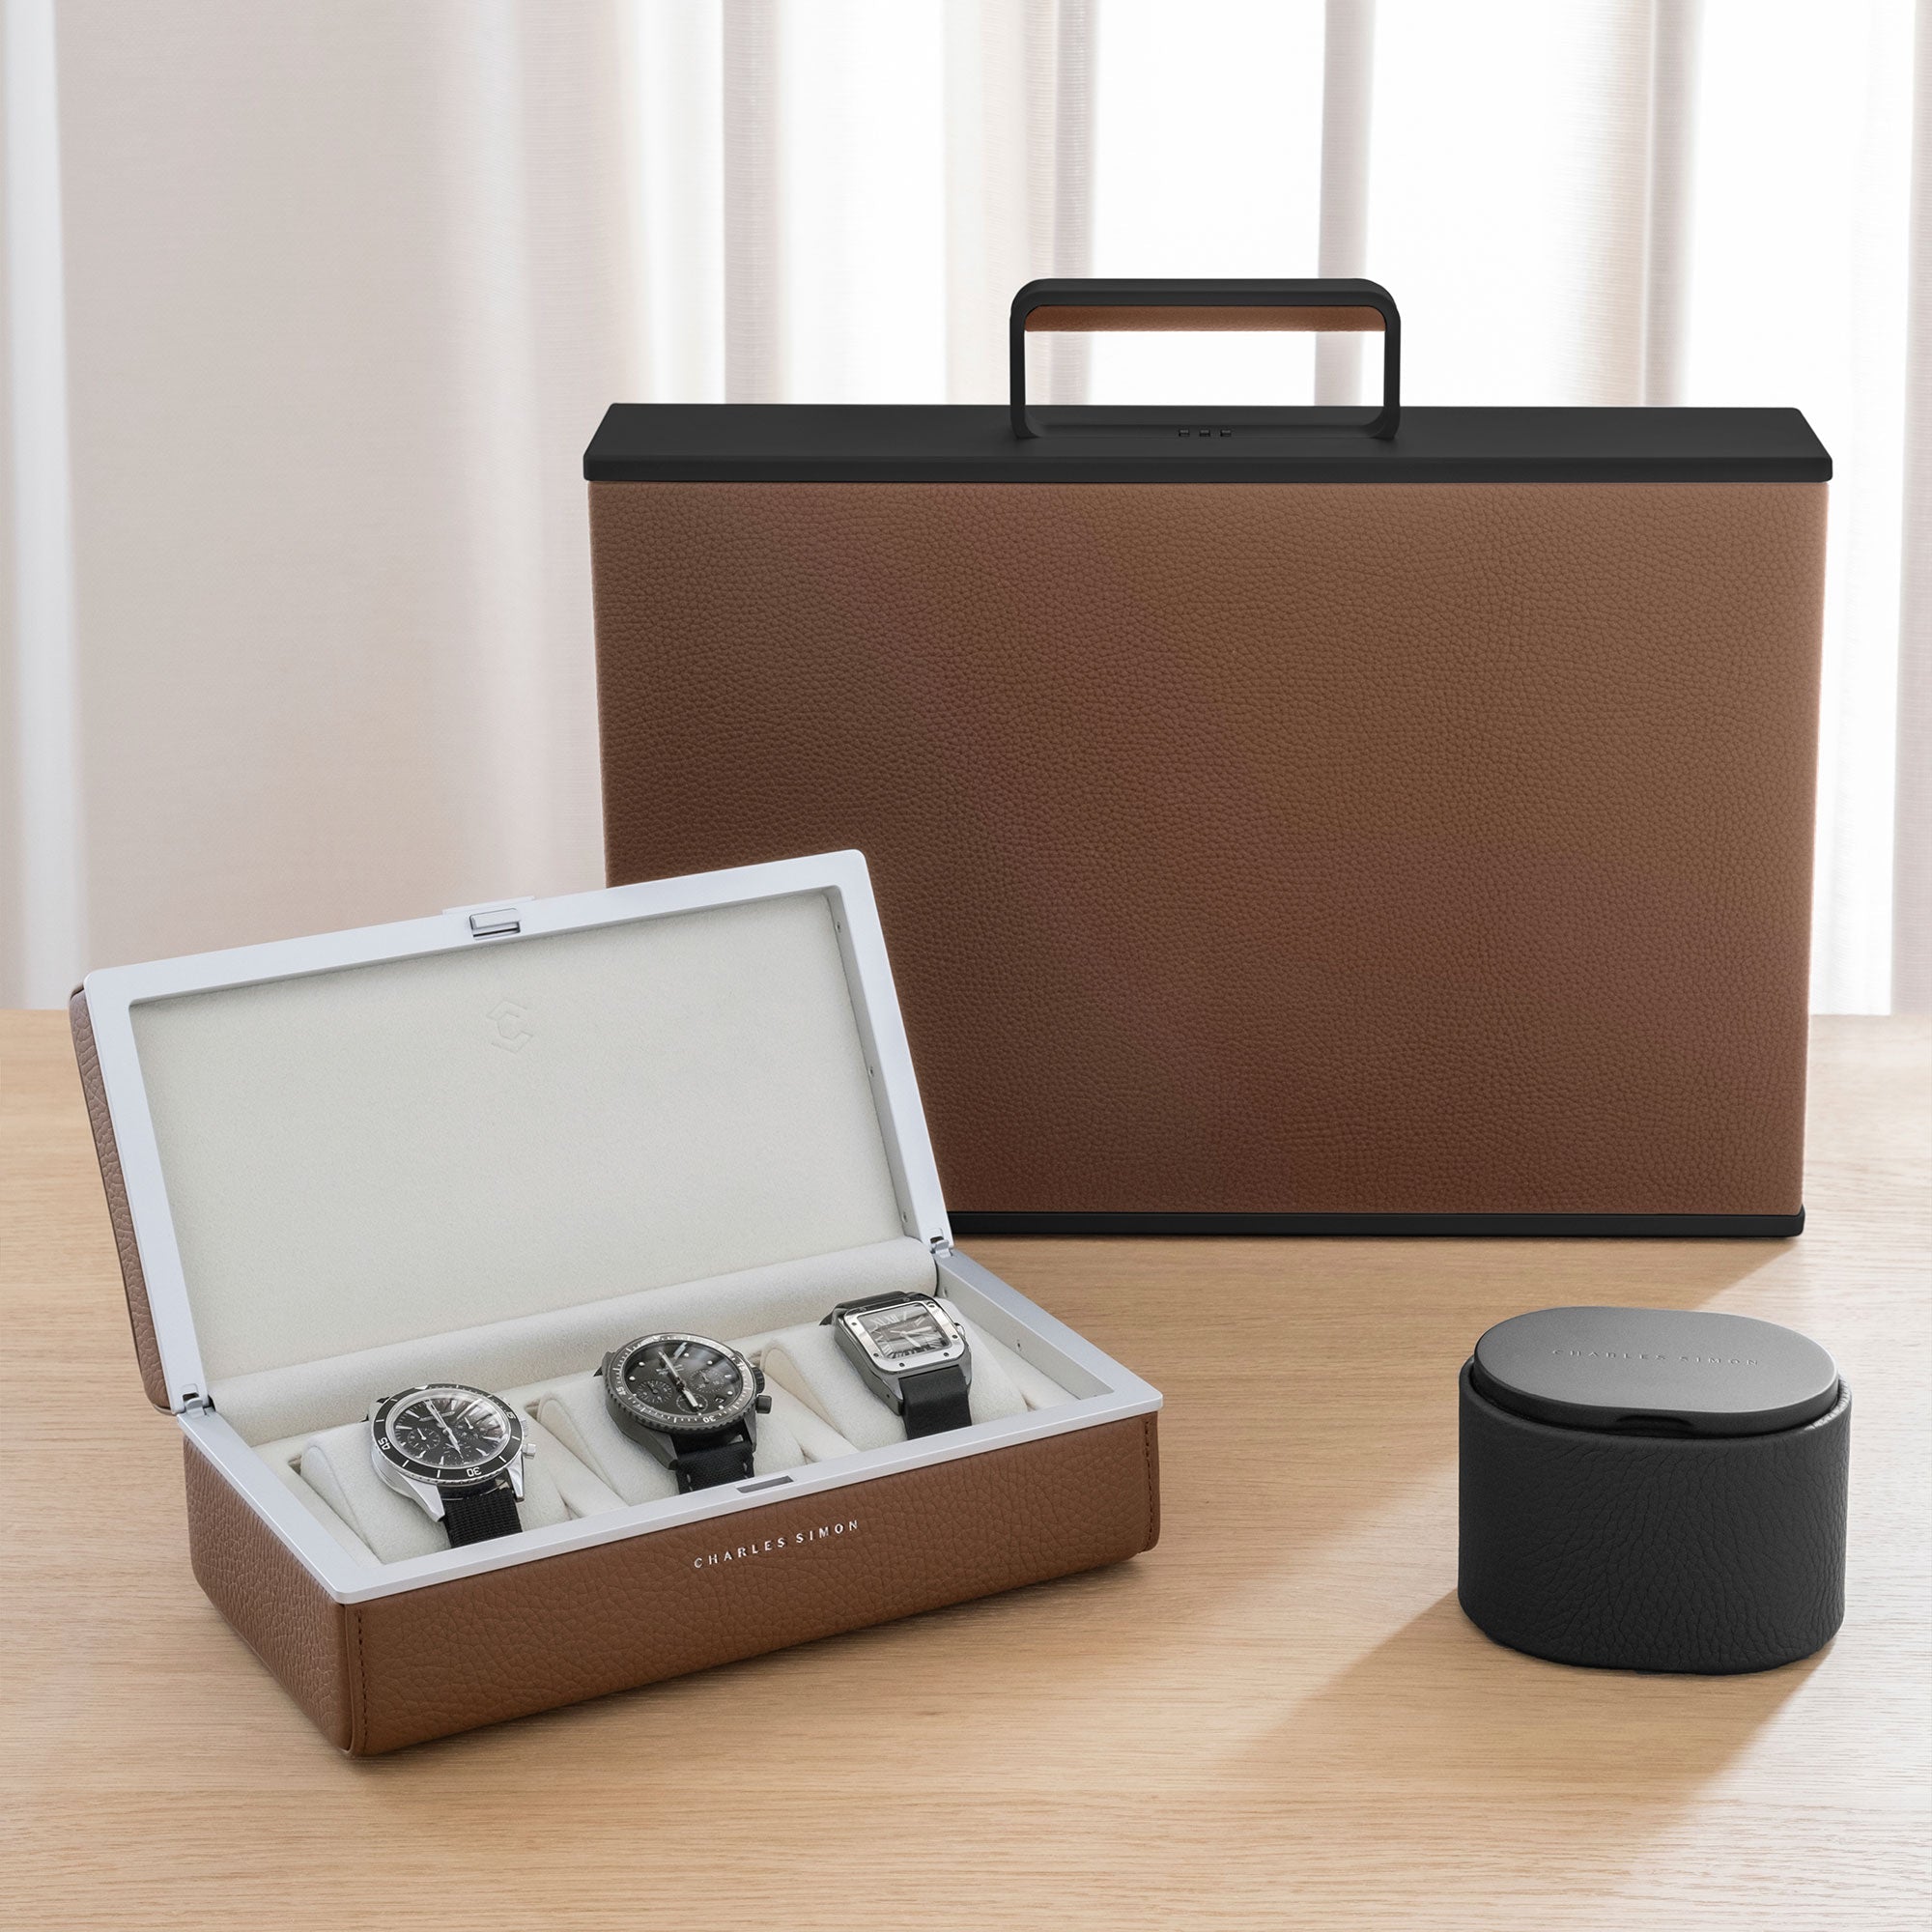 Collection of Charles Simon luxury watch accessories with open Eaton 3 watch case holding luxury watches on the left, Theo watch roll on the right and tan leather Mackenzie watch briefcase with black casing in the center of the background